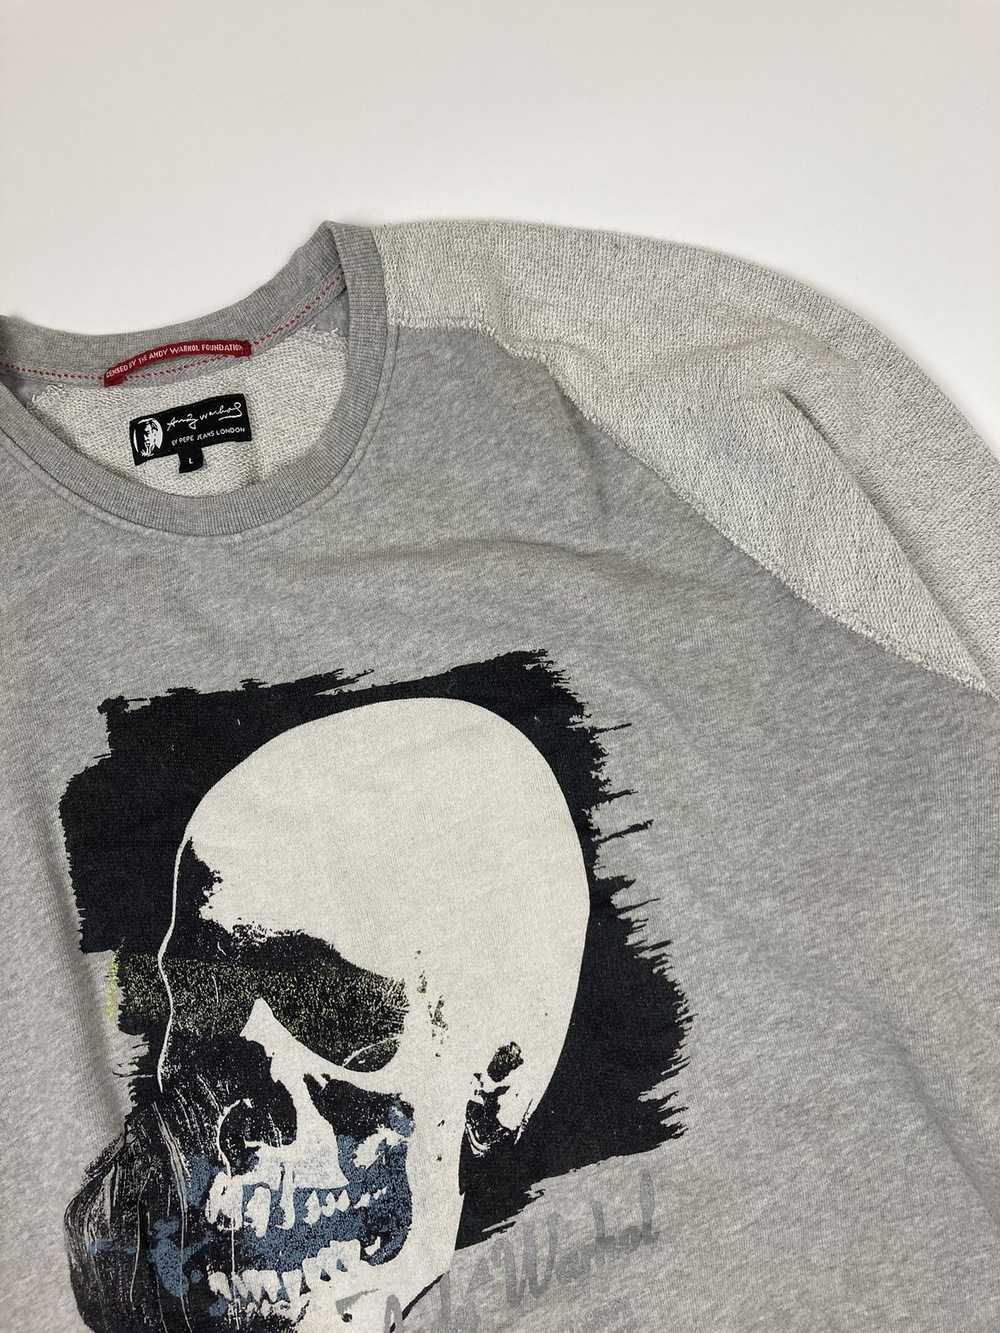 Andy Warhol × Pepe Jeans Andy Warhol Skull Sweater - image 6